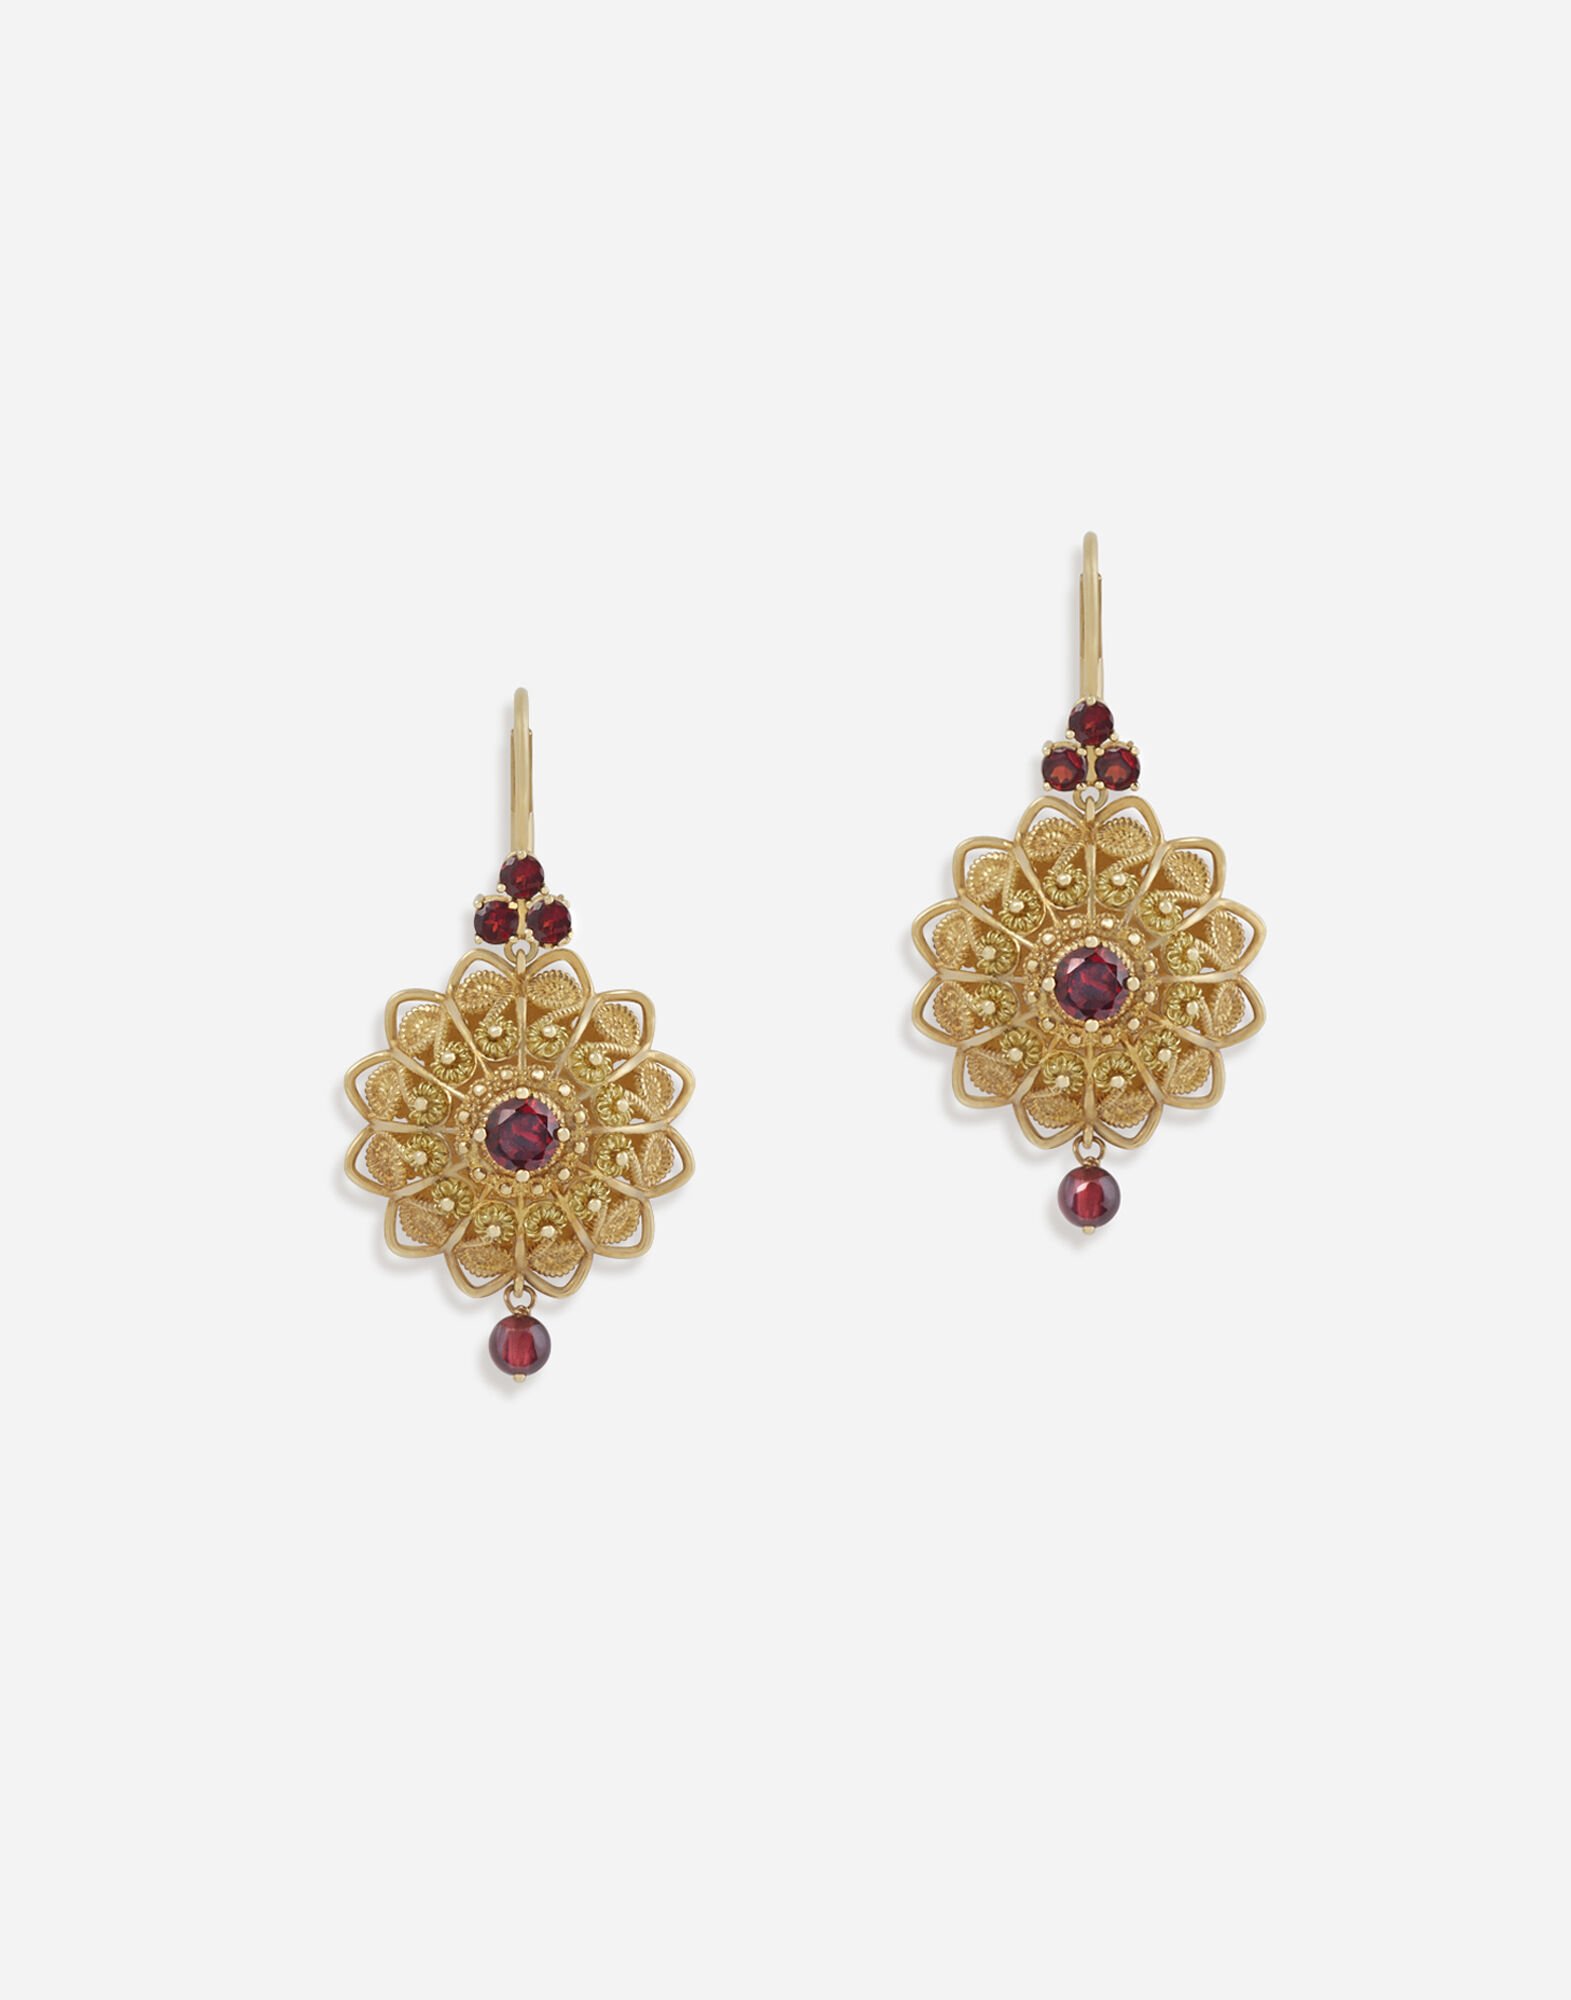 Dolce & Gabbana Pizzo earrings in yellow gold and rhodolite garnets Gold WEJP1GWROD1